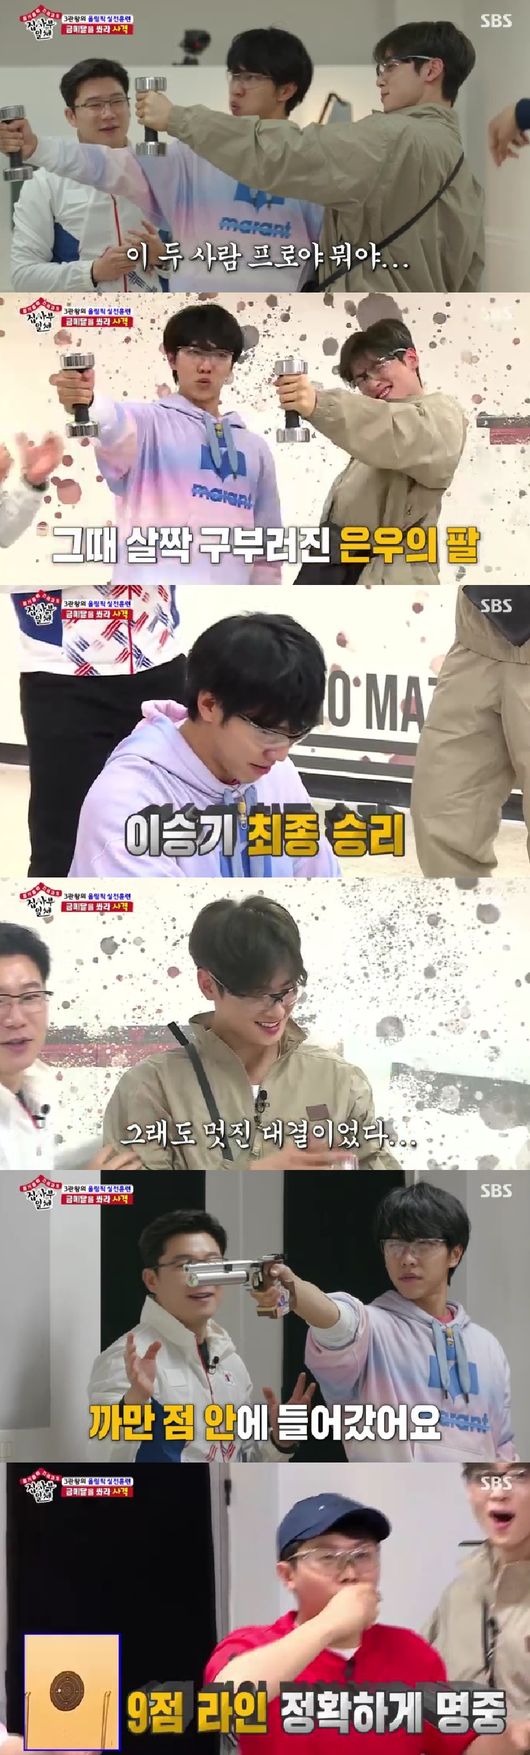 Cha Eun-woo and Lee Seung-gi caught the eye by making a big-time broody match.In the SBS entertainment program All The Butlers broadcasted on the 3rd, Olympia Games mania Cha Eun-woo played an active role.Kim Dong-Hyun and Cha Eun-woo joined the All The Butlers as new Mumbers.First, Cha Eun-woo told his brothers to express his feelings in five letters, saying, I wanted to see.The members were delighted that we cast Jung Eun-woo.In the meantime, All The Butlers joined the youngest, saying, I will do my best, I will report.The crew told the members that they would be with the hero masters. They were the Olympic Games N-gwan players.Yang Hak-Seon, a gymnast who won the first gold medal in Korean gymnastics history, appeared. Next, Taekwondos pride Lee Dae-hoon, who is ranked number one in Taekwondo world, also appeared and cheered everyone with his ability to defeat.Continuing to shoot Jin Jong-oh entered with pride.Each asked about his career: Jin Jong-oh said that the medal totaled six, and Cha Eun-woo said, I know four golds and two silvers.Yang Hak-Seon said, The technology for 10 years has been able to do only for me so far, and the technical name is Yang Hak-Seon, and Cha Eun-woo showed up as an Olympian game mania, saying, I know it as the first gold medal in Korean gymnastics history.He was quick to kick 10 consecutive Power kicks, and Cha Eun-woo also challenged him to feel the power of the golden kick.Cha Eun-woo said, My face is red and I change it and I say, How do you kick well? But then he lost his center and fell down, making everyone laugh.Cha Eun-woo said, I was too strong to kick hard, but Lee Dae-hoon said, I was good enough to draw a virtue when I competed with me. Accuracy and power are important for scoring.Next, Jin Jong-oh showed shooting demonstrations; top legends also surprised everyone with their amazingly vibitan-sized shooting skills.He said, When patience time returns to achievement, confidence is the source of victory.The members all arrived at the shooting hall together. He showed the shooting demonstration first, and once again he showed ten dignity.Lee Dae-hoon suggested a dumbbelling match, saying that shootings basic training was weight, and with everyone eliminated, former church presidents Um Chin-a Bro, Cha Eun-woo and Lee Seung-gi played.Cha Eun-woo was eliminated with his arm bent while both proud geniuses were in the spotlight, and Lee Seung-gi was the final winner.In addition, as a special army officer of the army, he hit the 9-point line accurately andAll The Butlers capture